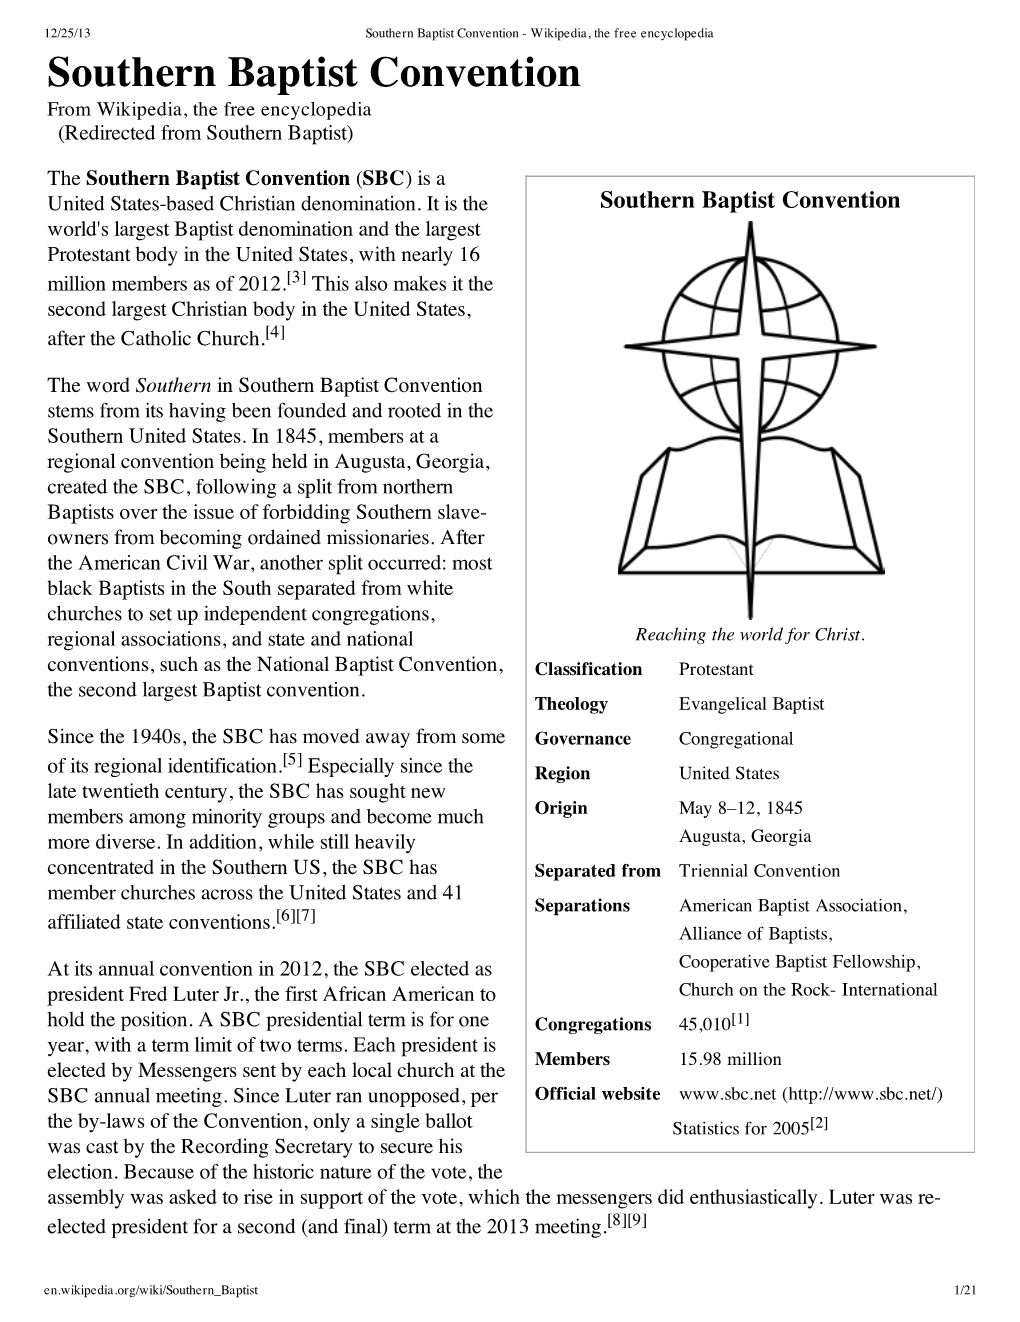 Southern Baptist Convention - Wikipedia, the Free Encyclopedia Southern Baptist Convention from Wikipedia, the Free Encyclopedia (Redirected from Southern Baptist)